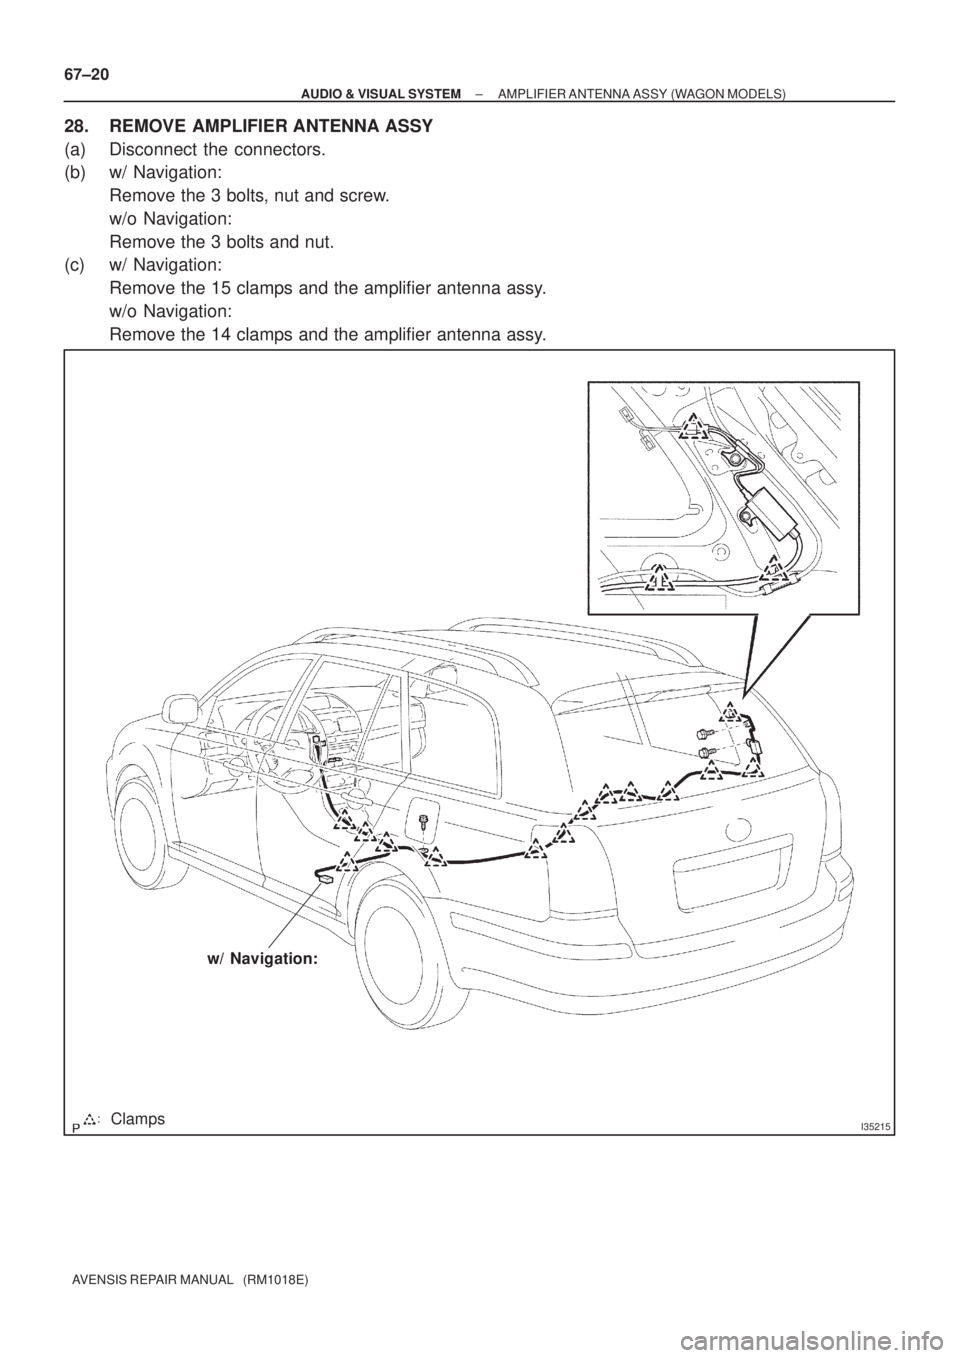 TOYOTA AVENSIS 2002  Repair Manual I35215Clamps
w/ Navigation:
67±20
± AUDIO & VISUAL SYSTEMAMPLIFIER ANTENNA ASSY (WAGON MODELS)
AVENSIS REPAIR MANUAL   (RM1018E)
28. REMOVE AMPLIFIER ANTENNA ASSY
(a) Disconnect the connectors.
(b) 